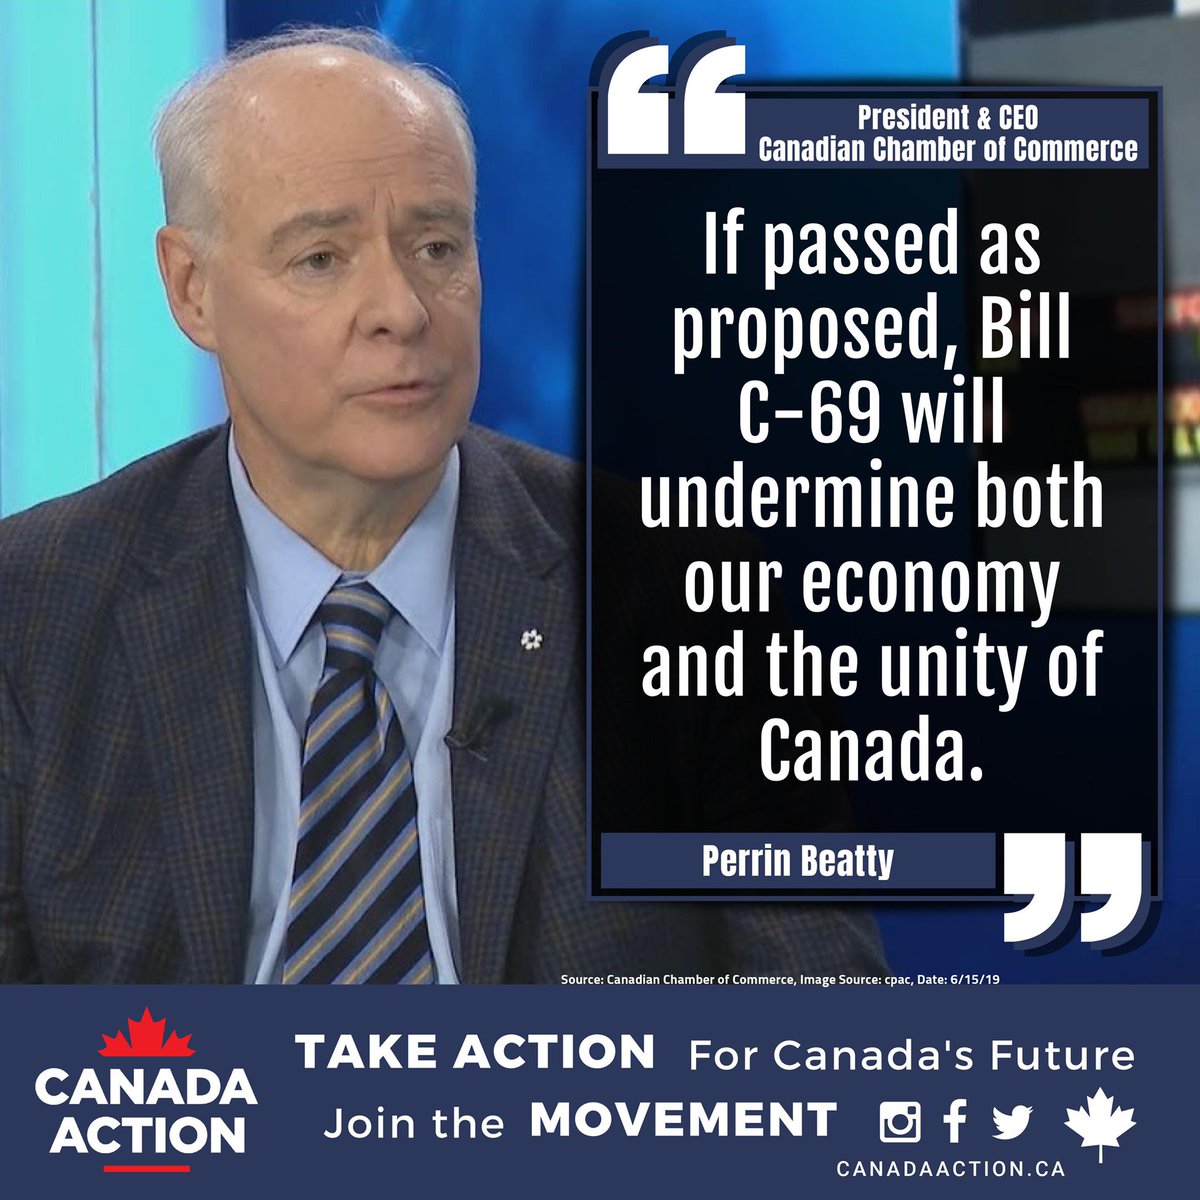 The Canadian Chamber of Commerce says #BillC69 undermines our economy and our unity.

In the last week hundreds of workers in our energy and forestry sectors have lost their jobs - this legislation only makes our competitiveness problems worse. #CdnPoli